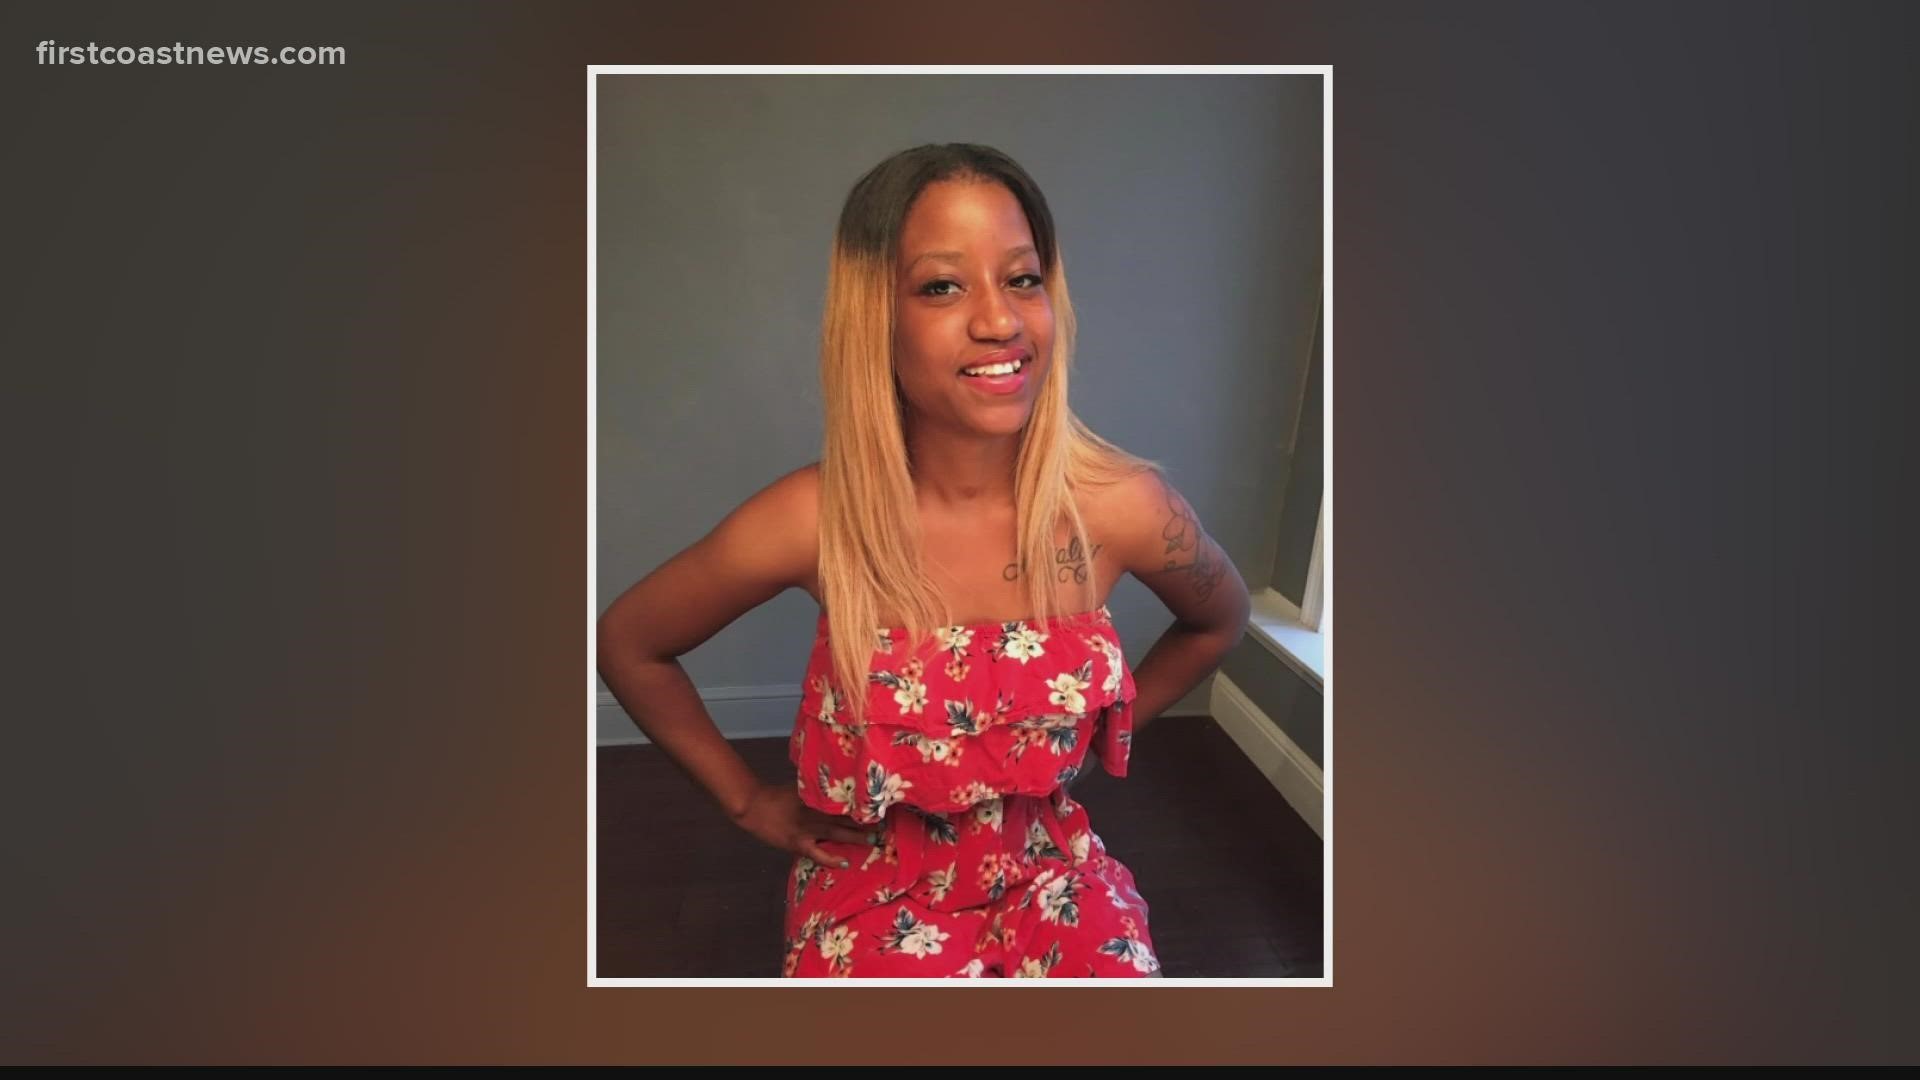 Brittany Palmer had been missing since August 2020. The Jacksonville Sheriff's Office recently confirmed her body was found although her cause of death is not known.